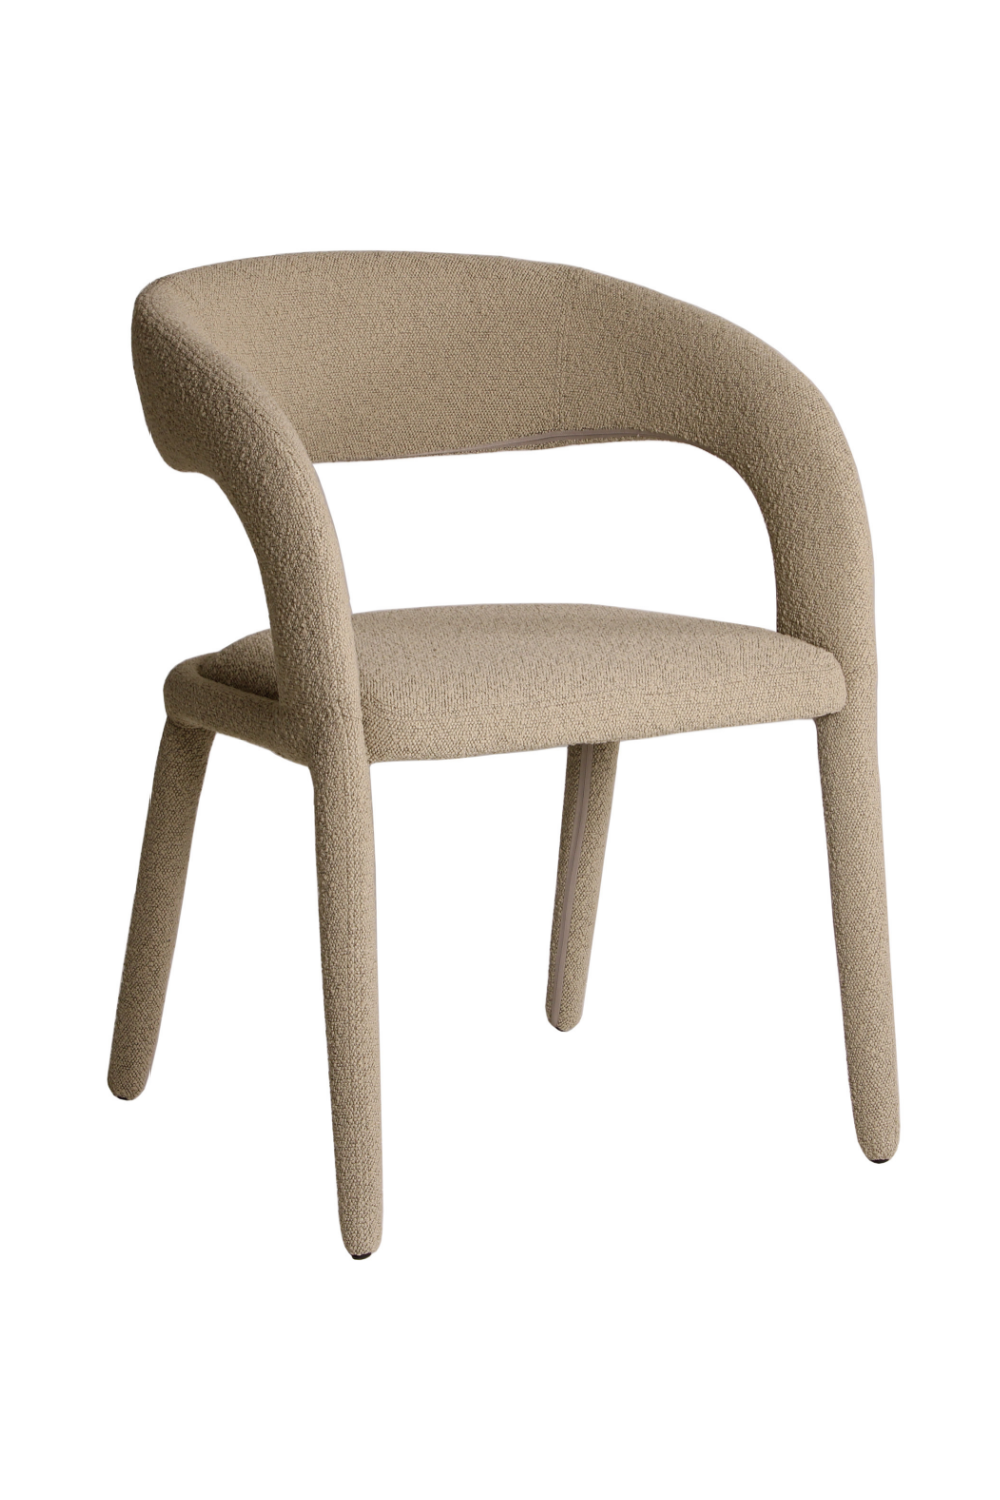 Beige Bouclé Curved Dining Chair | Andrew Martin Knox | Oroa.com